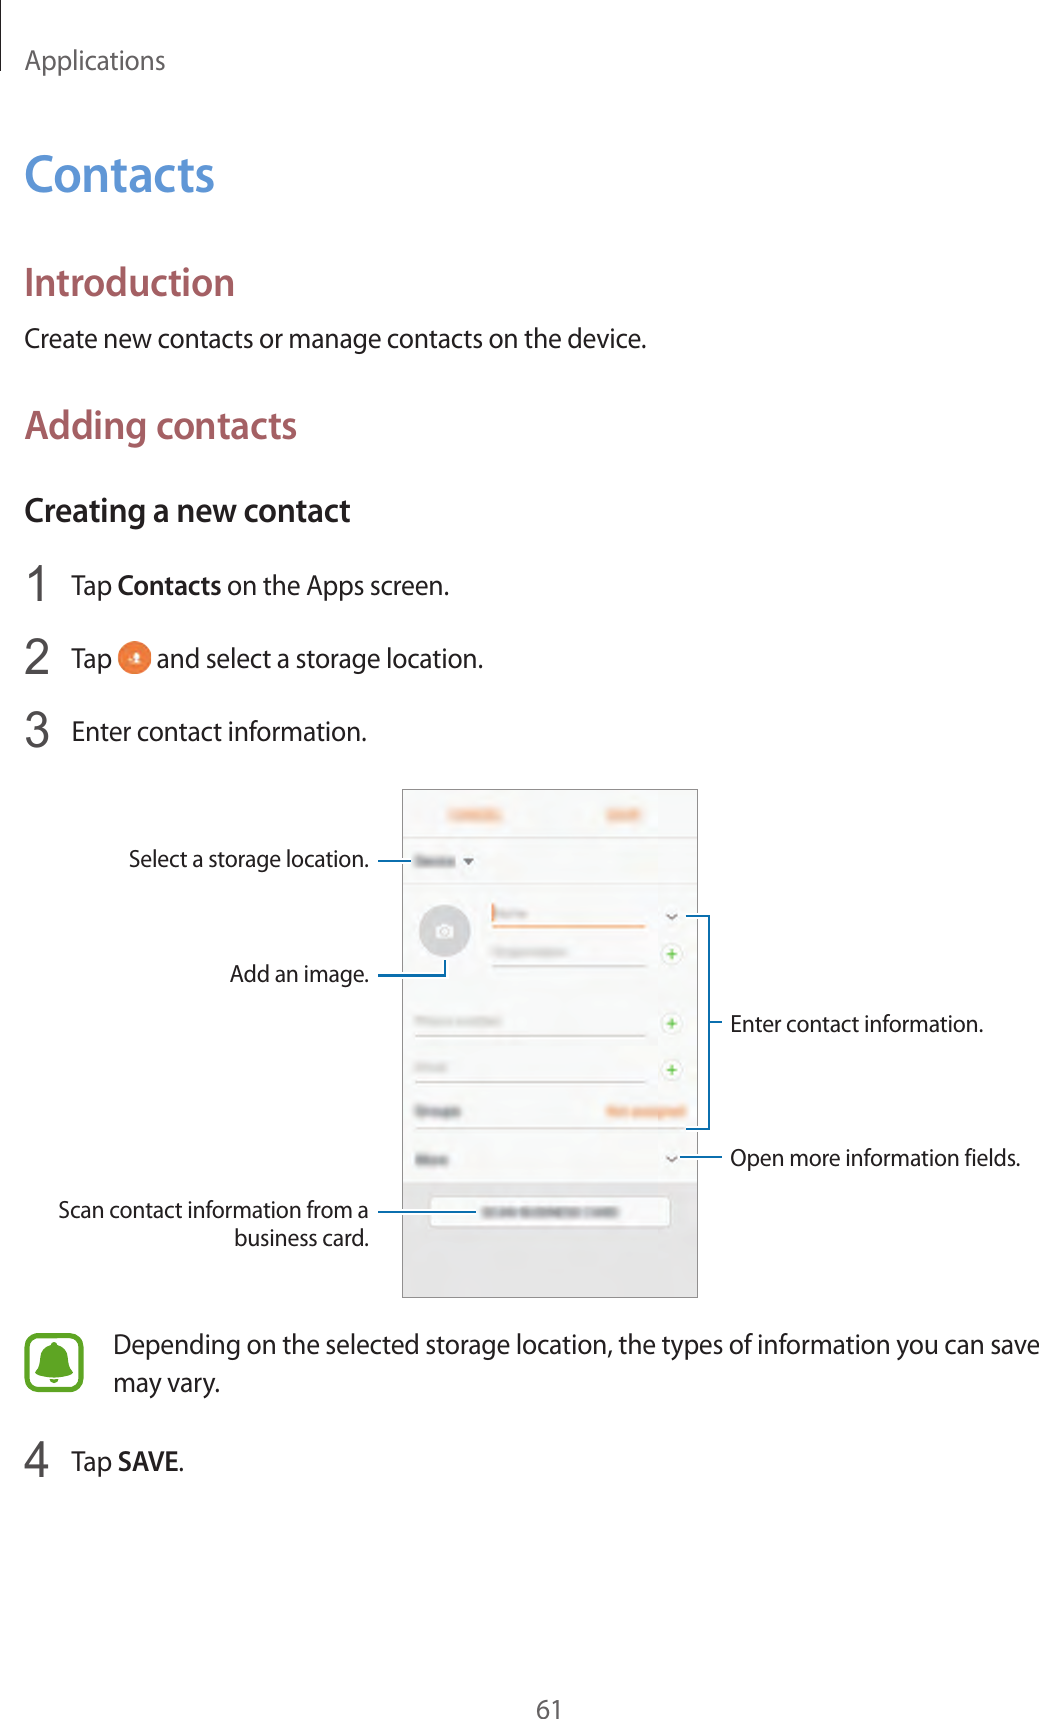 Applications61ContactsIntroductionCreate new contacts or manage contacts on the device.Adding contactsCreating a new contact1  Tap Contacts on the Apps screen.2  Tap   and select a storage location.3  Enter contact information.Select a storage location.Add an image.Open more information fields.Scan contact information from a business card.Enter contact information.Depending on the selected storage location, the types of information you can save may vary.4  Tap SAVE.